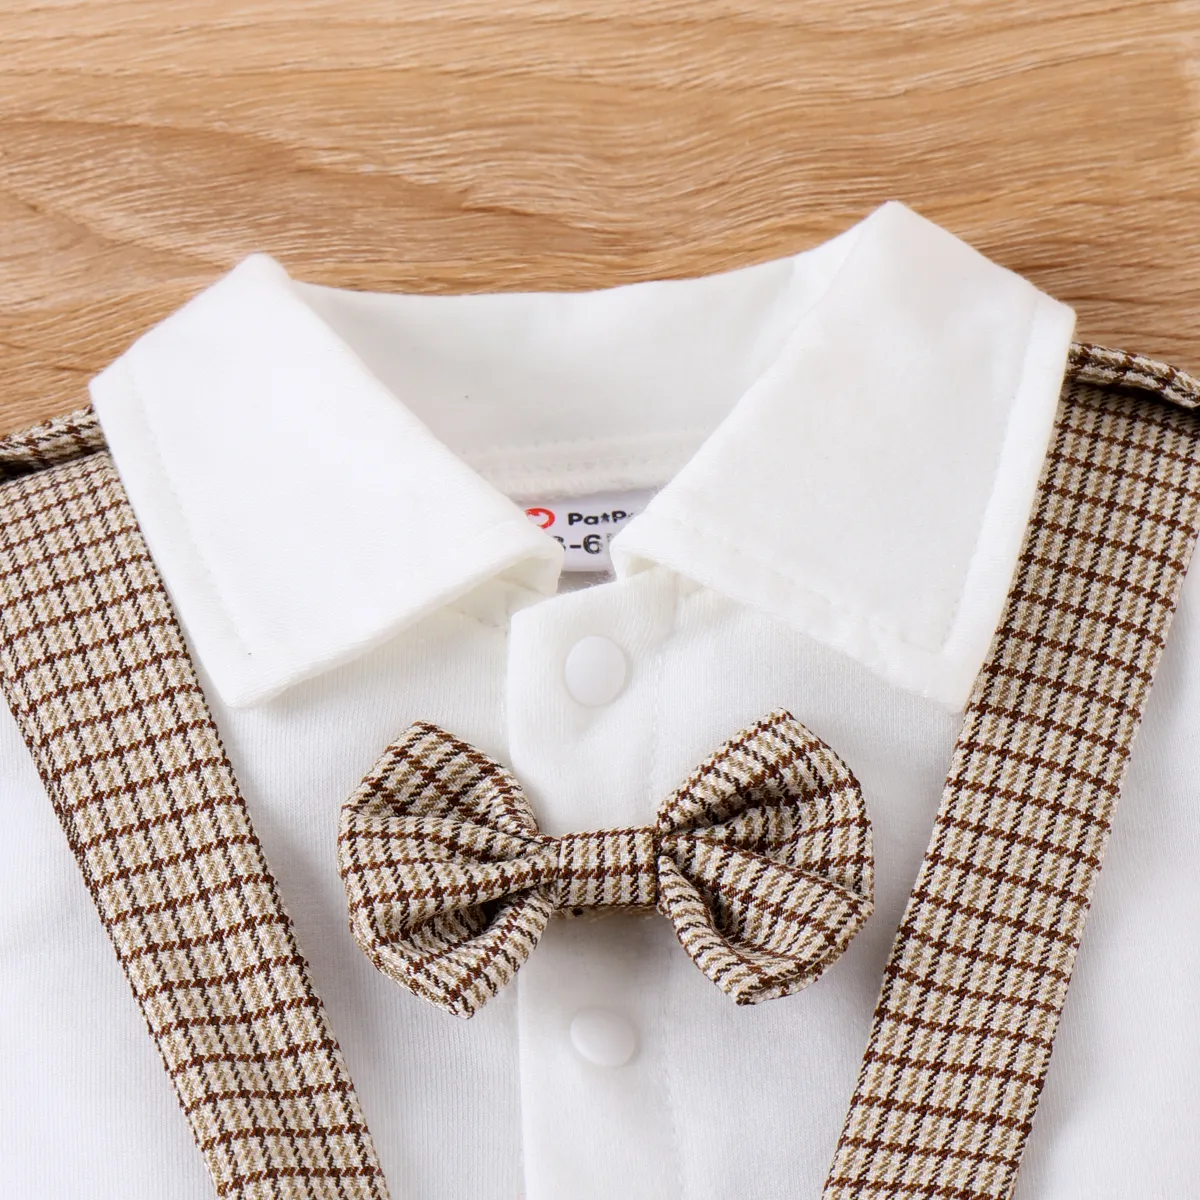 2pcs Baby Boy Plaid Bow Tie Long-sleeve Shirt and Bear Embroidery Plaid Suspender Pants Set Brown big image 1